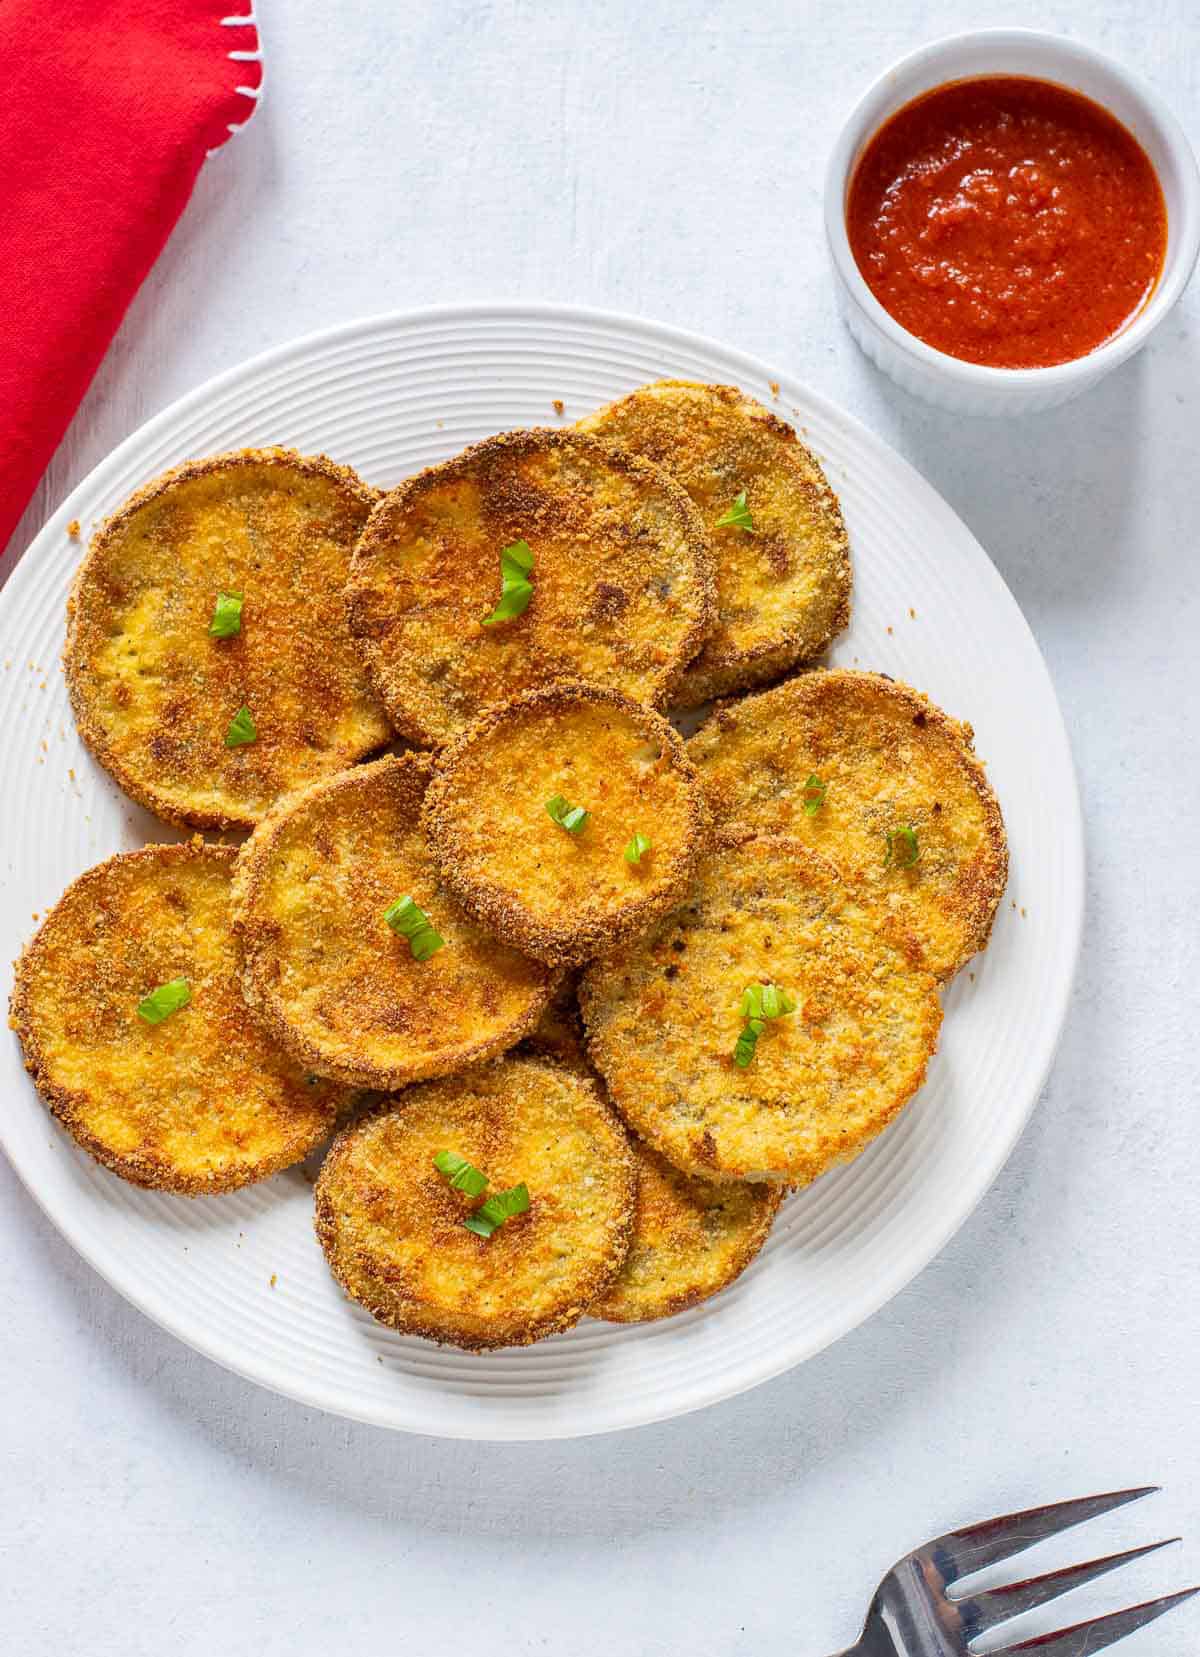 baked breaded eggplant slices on plate with marinara on side